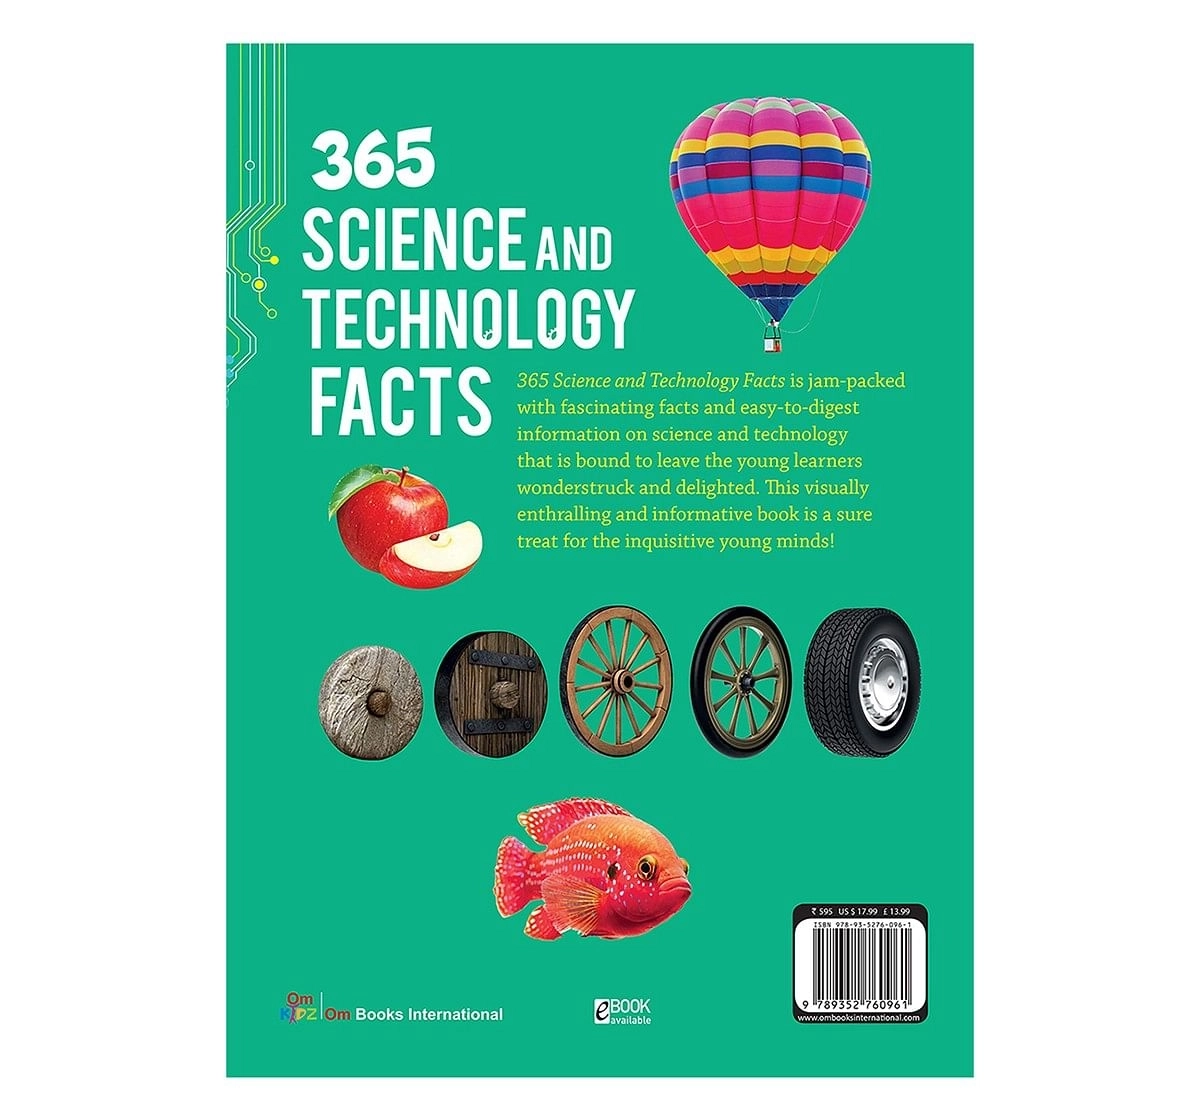 Om Kidz: 365 Science and Technology Facts, 236 Pages, Hardcover